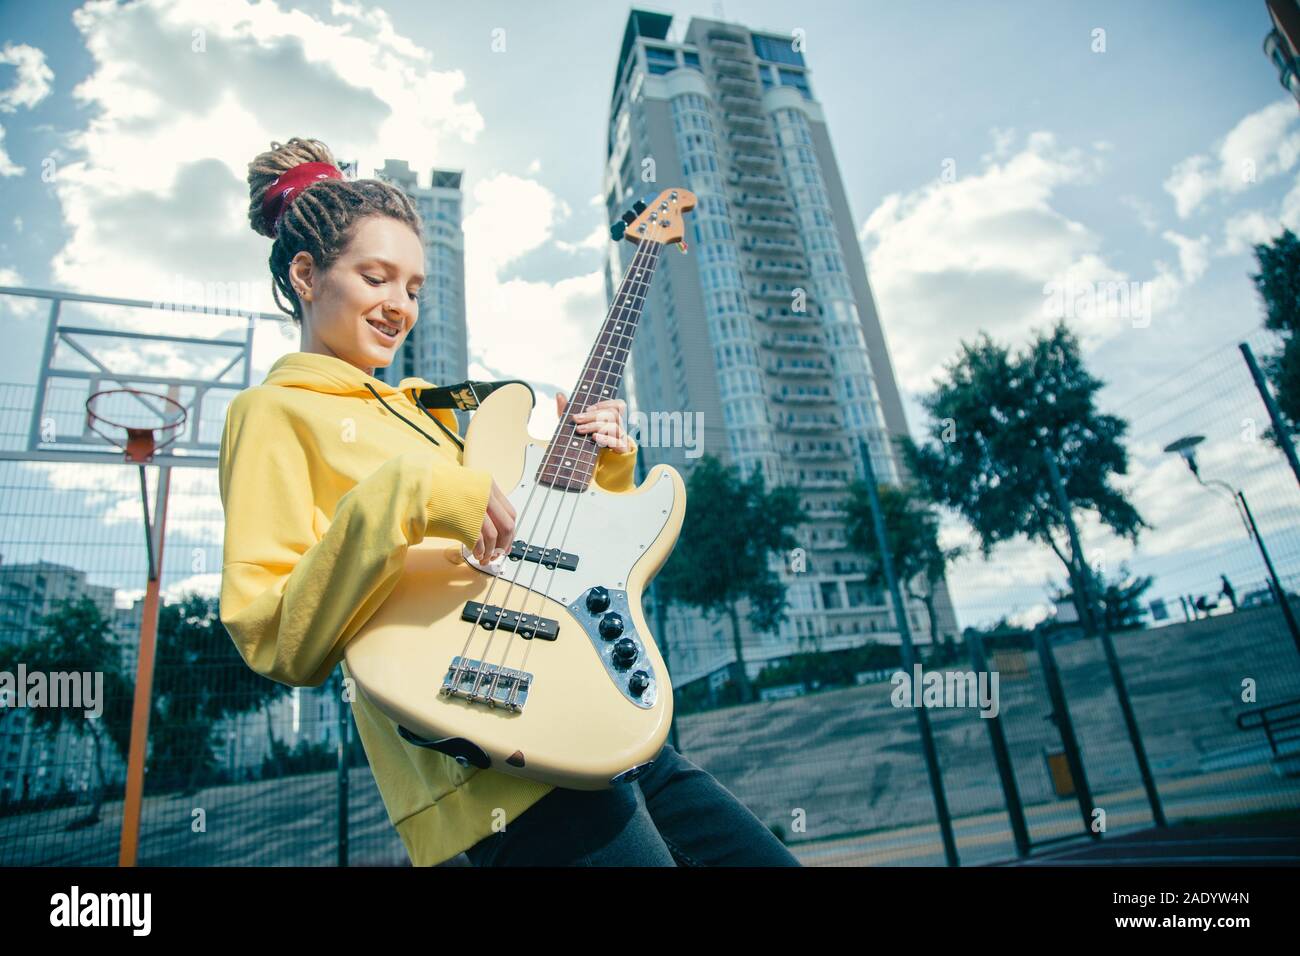 Waist up of young lady with dreadlocks playing the guitar outdoors Stock Photo